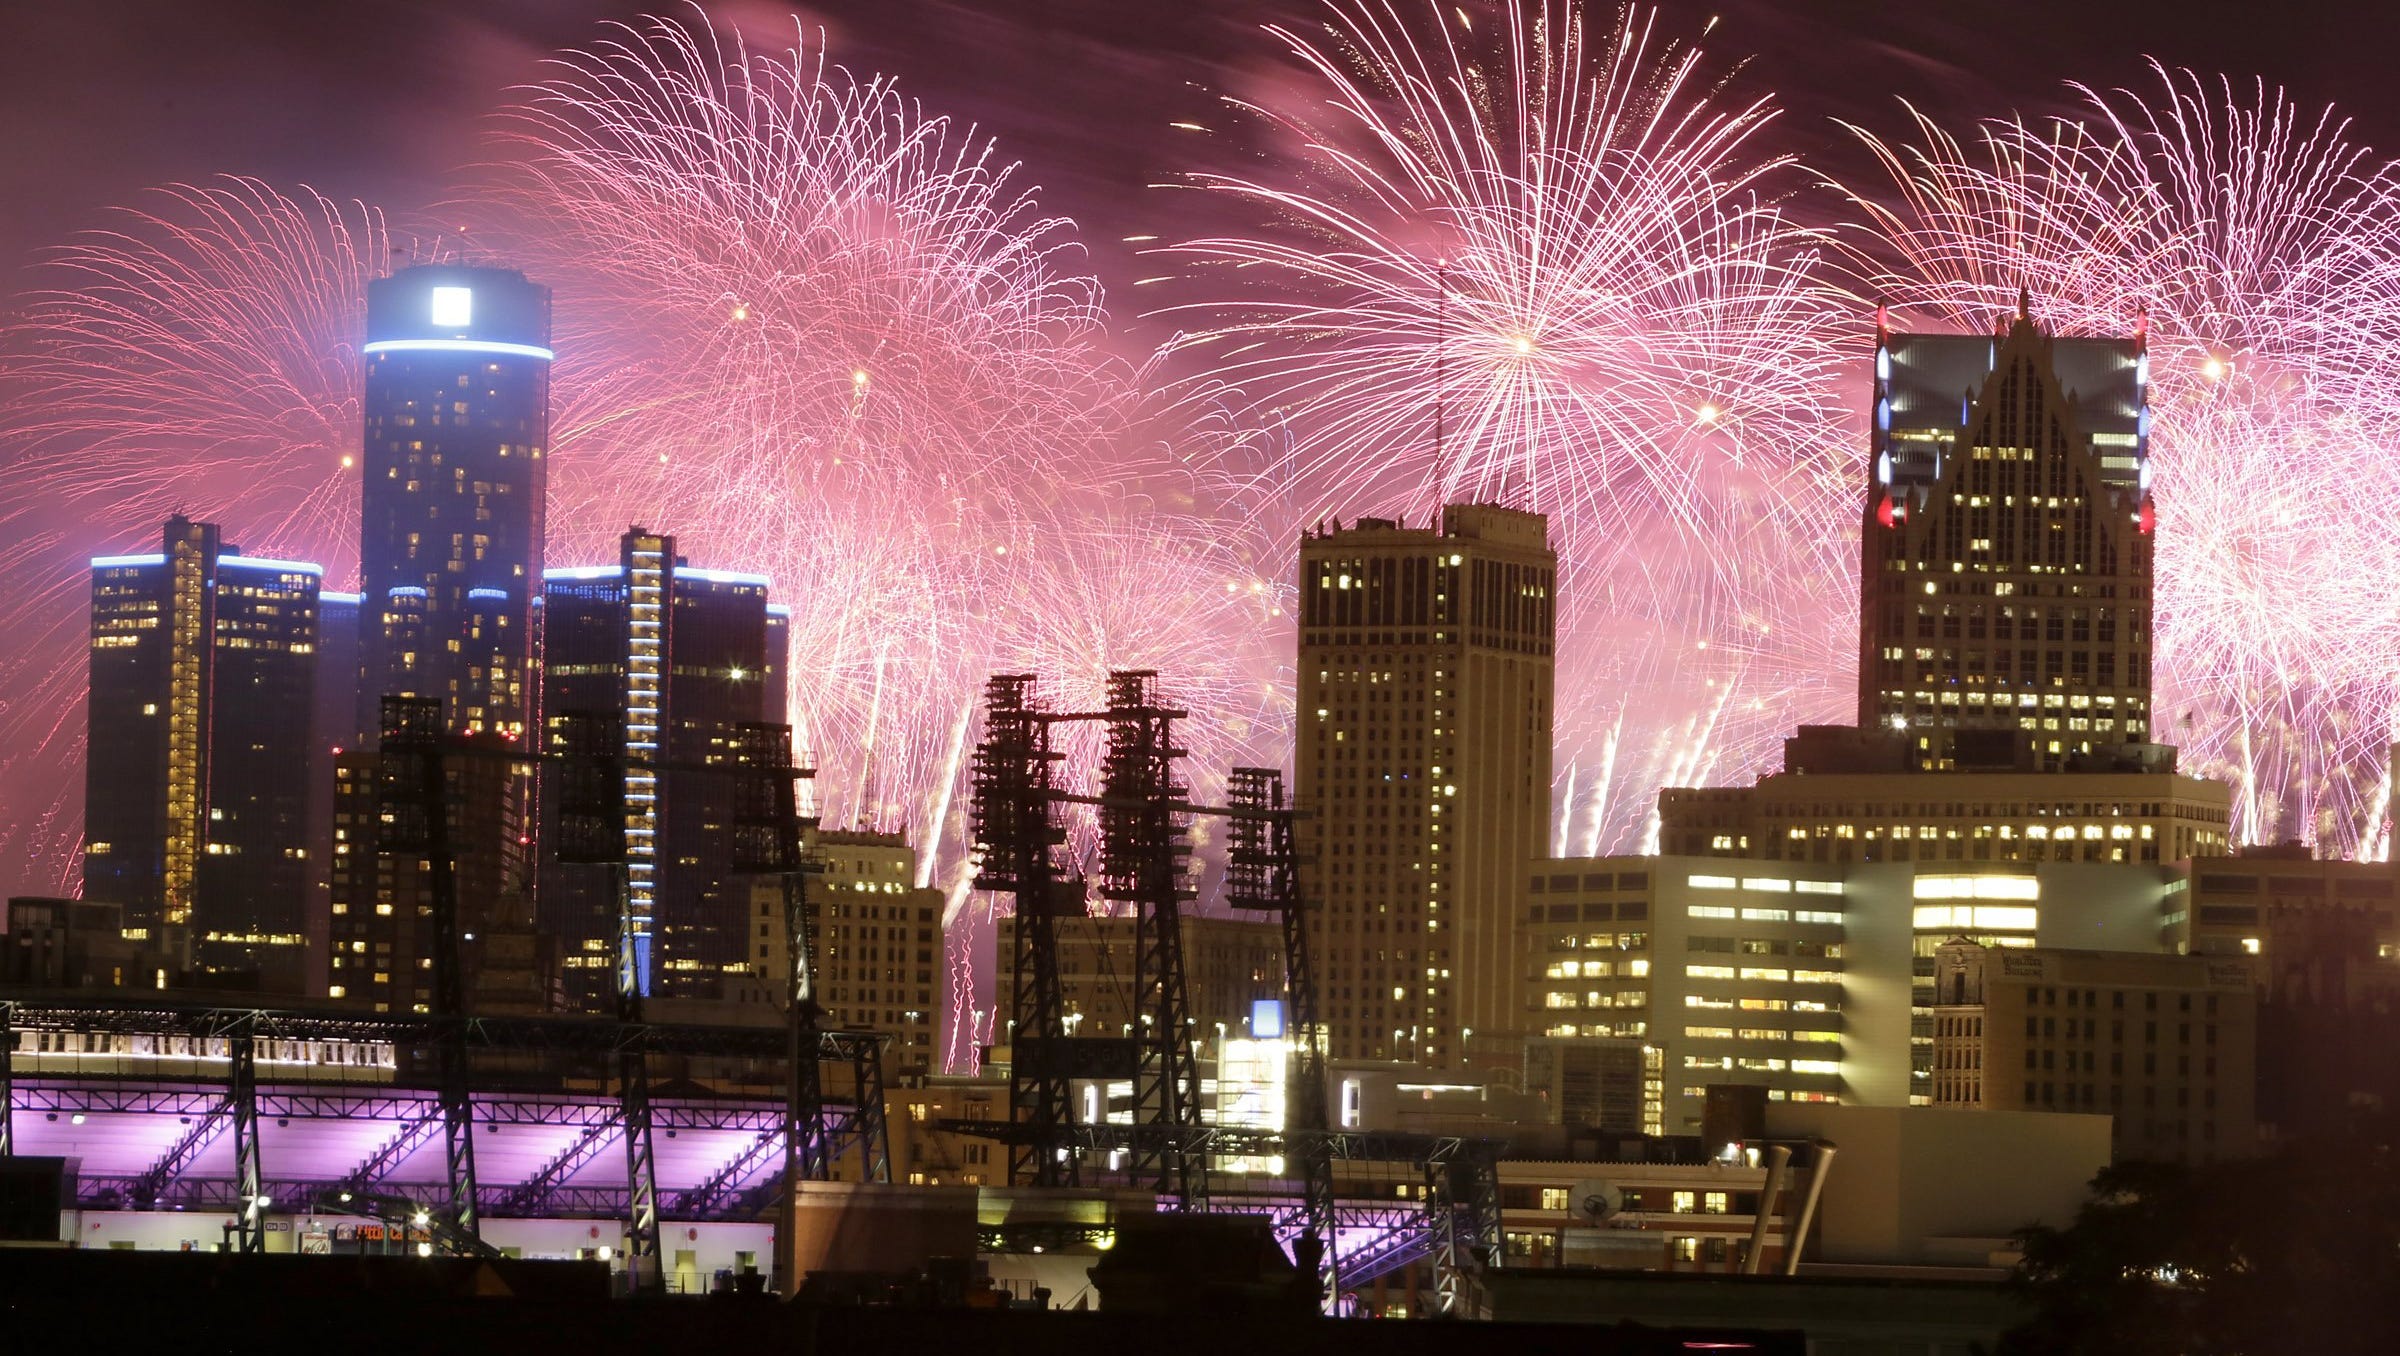 Where to watch fireworks in metro Detroit now through 4th of July